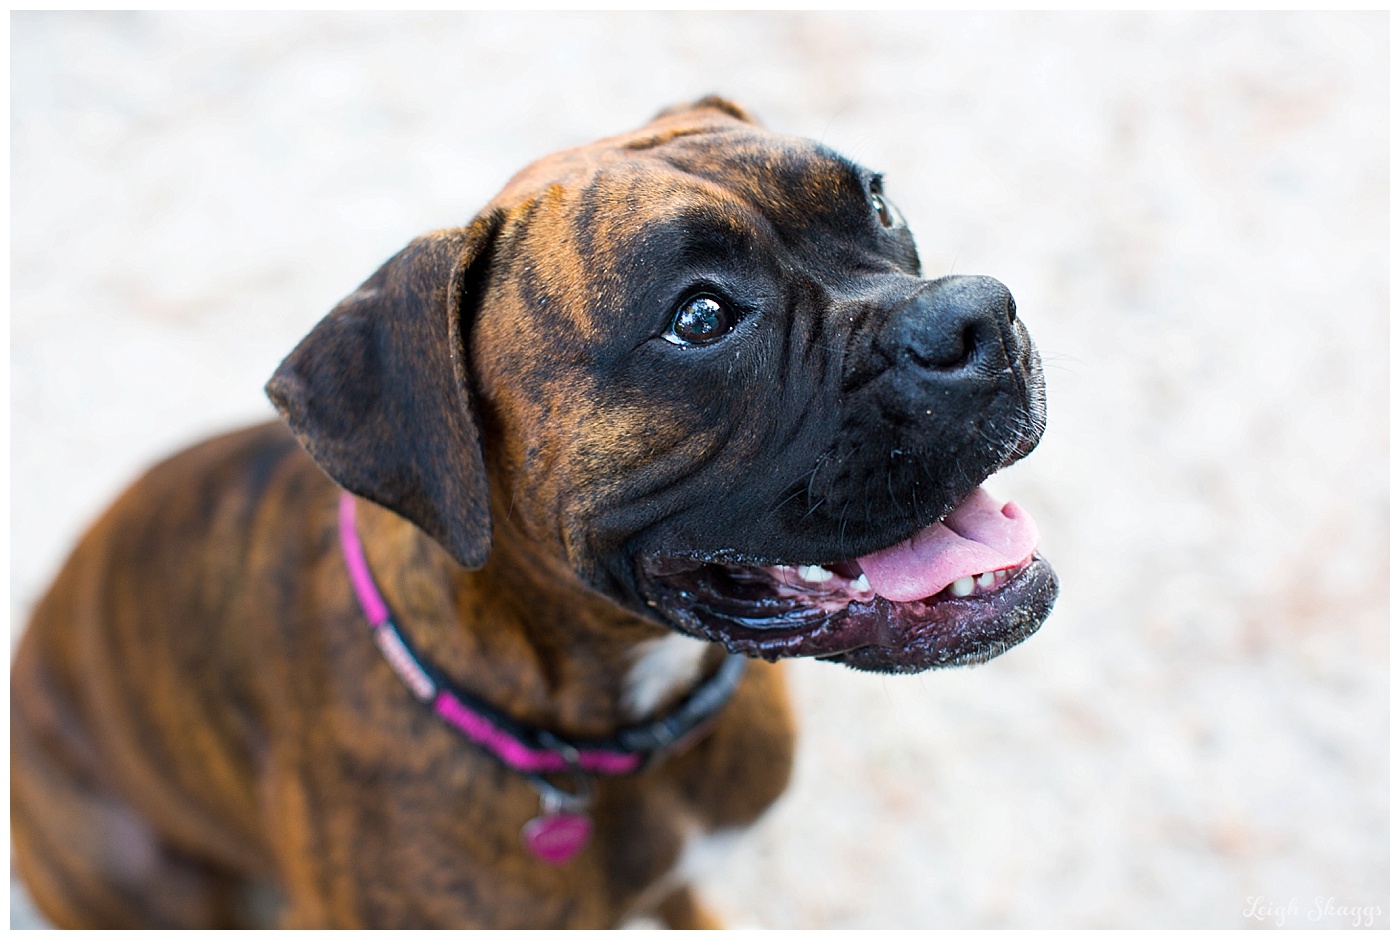 Tracey & Richard are Engaged Their First Landing Engagement session with Boxer Pups!